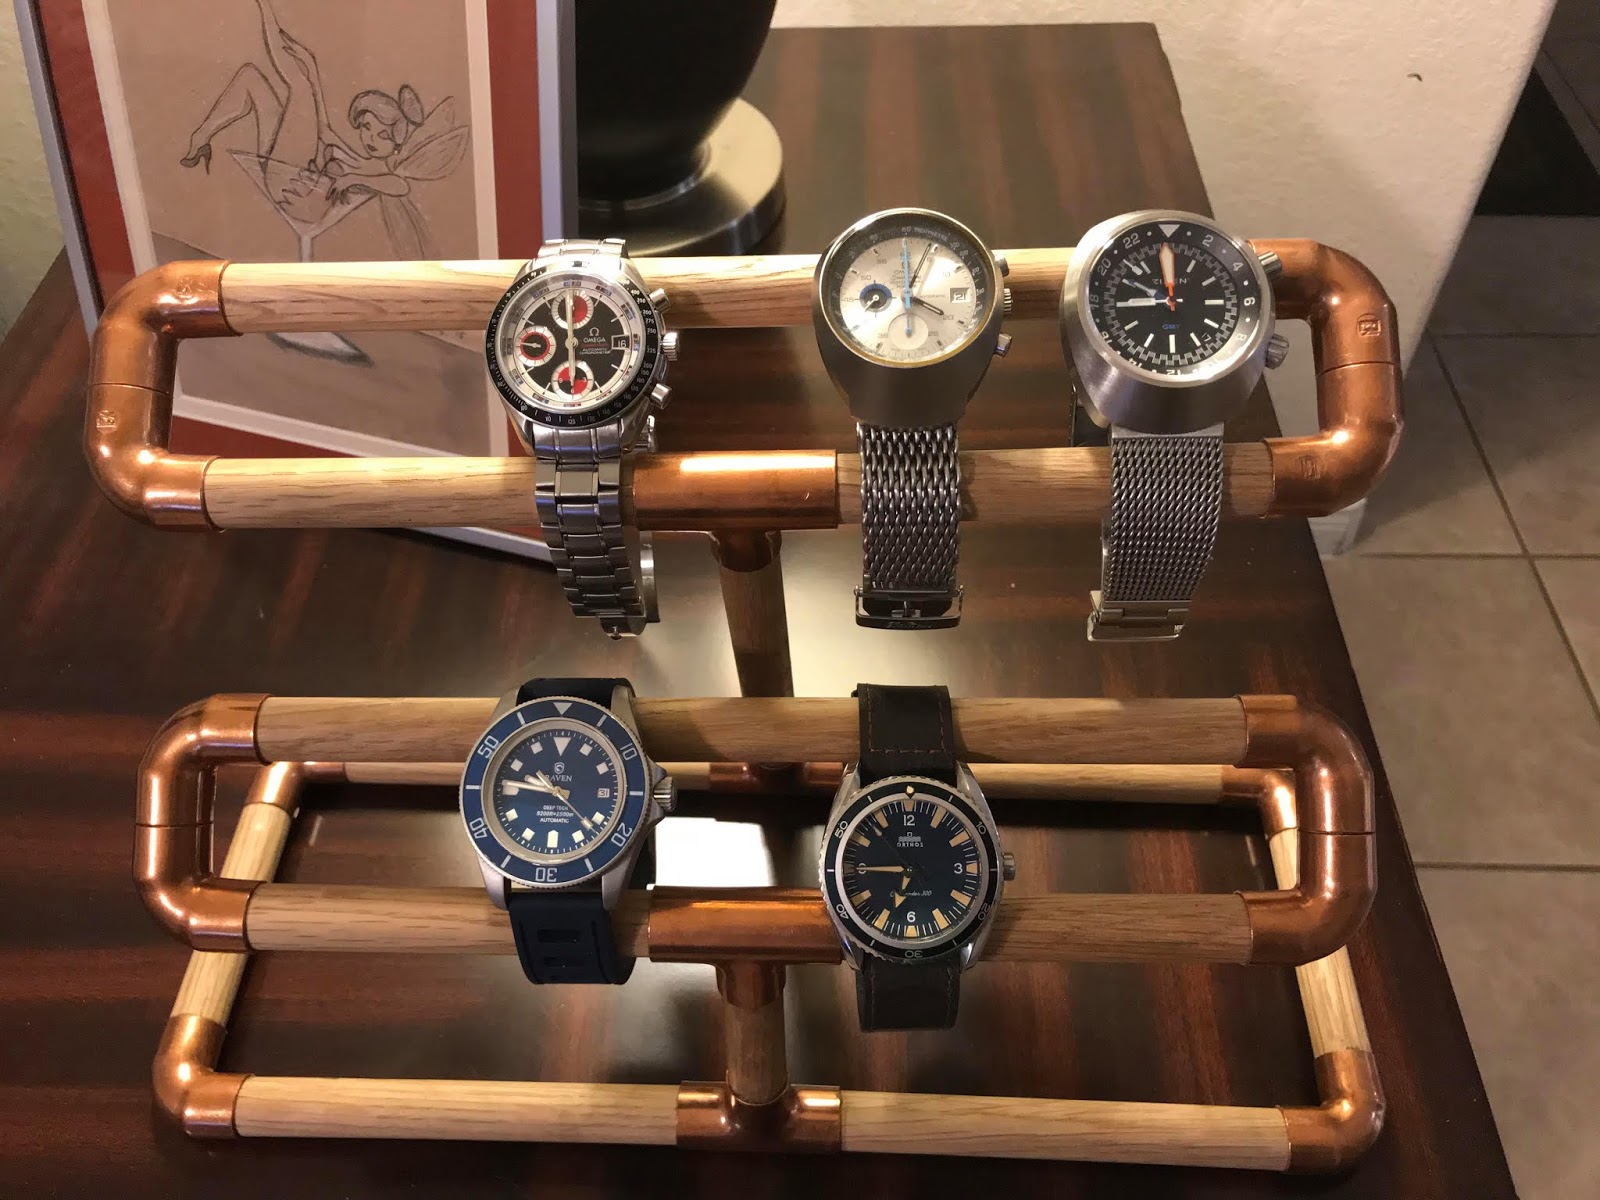 How to Make a Watch Stand